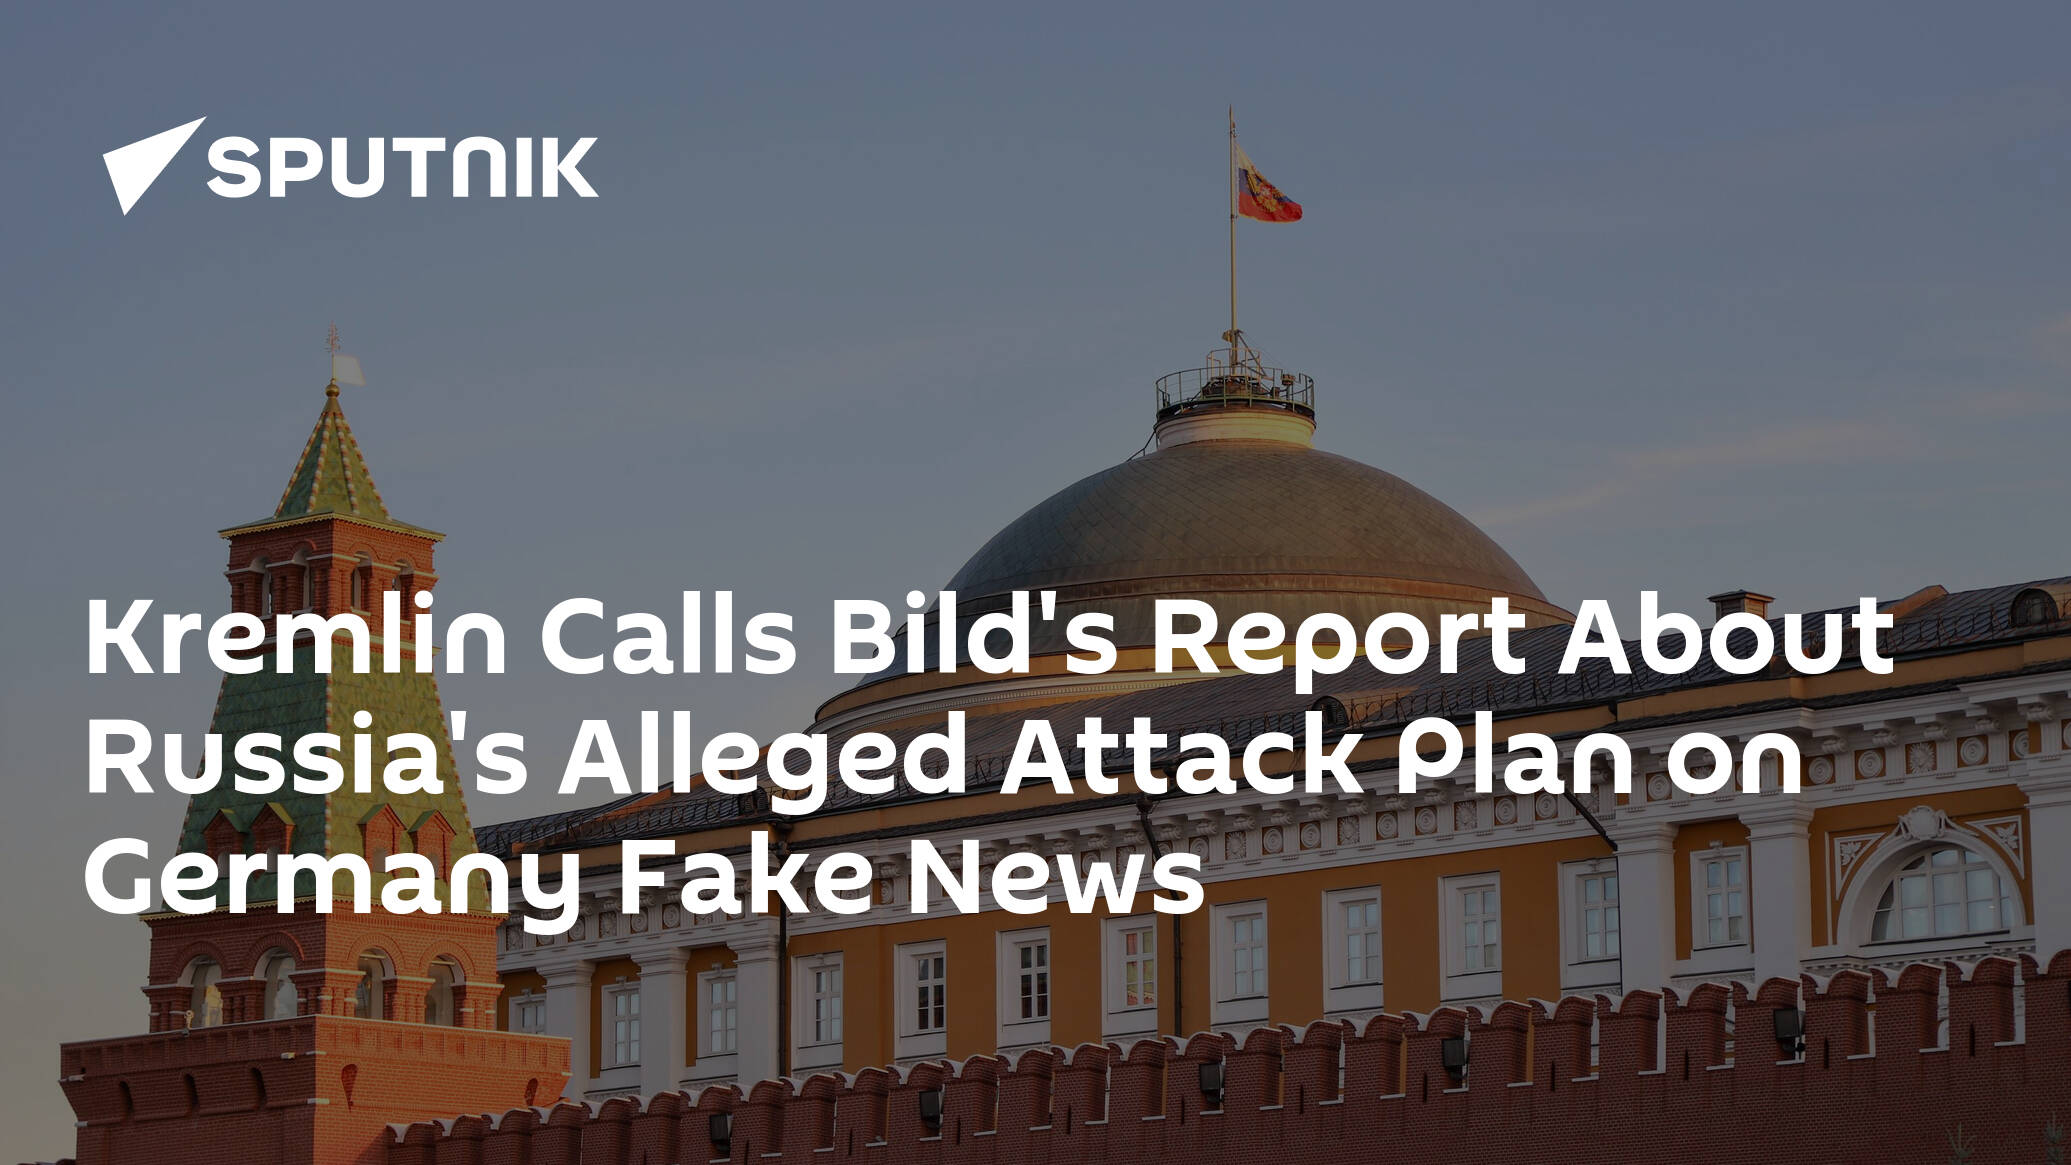 Kremlin Calls Bild's Report About Russia's Alleged Attack Plan on Germany Fake News